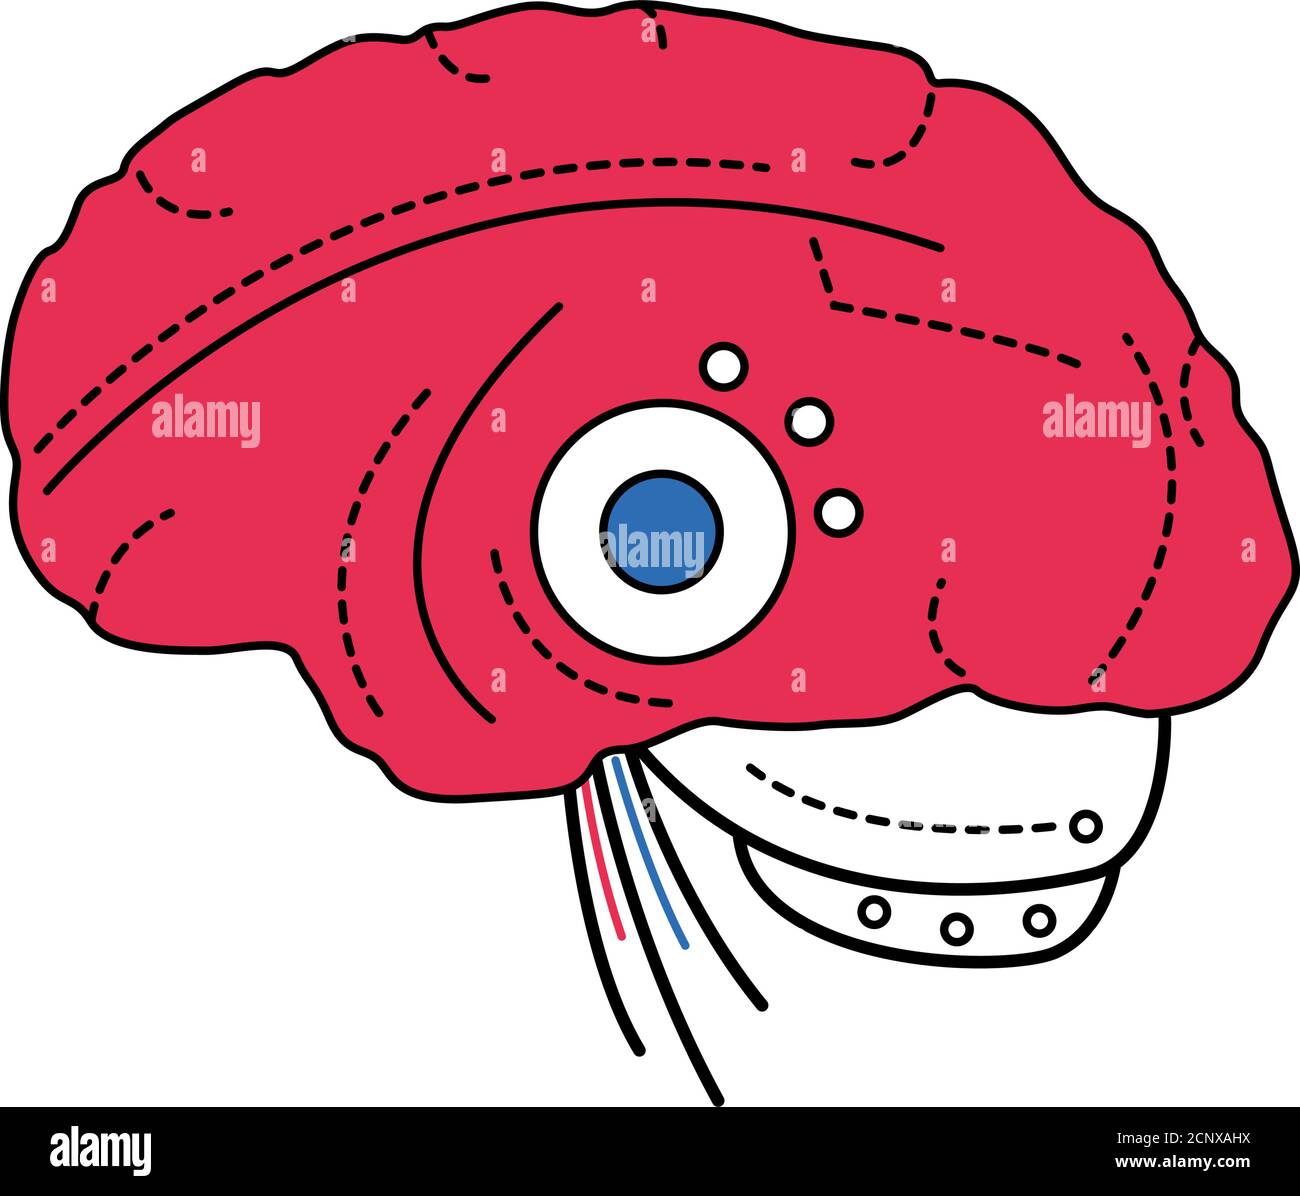 Bio artificial brain color line icon. Software and hardware with cognitive abilities similar to those of human brain. Pictogram for web page, mobile Stock Vector